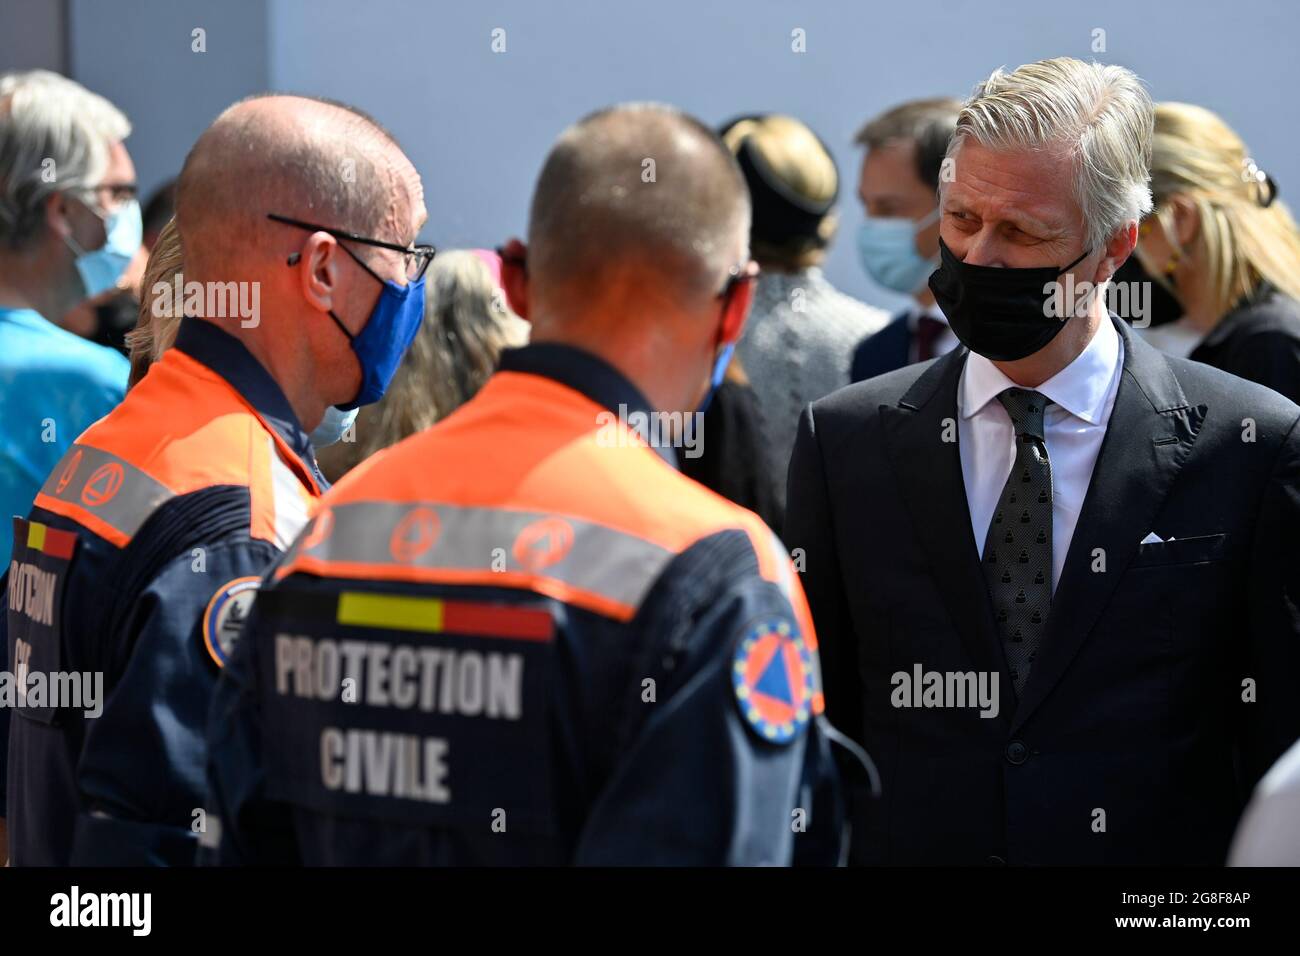 King Philippe - Filip of Belgium and Protection Civile - Civiele Bescherming workers pictured at a tribute ceremony with a minute of silence, part of Stock Photo